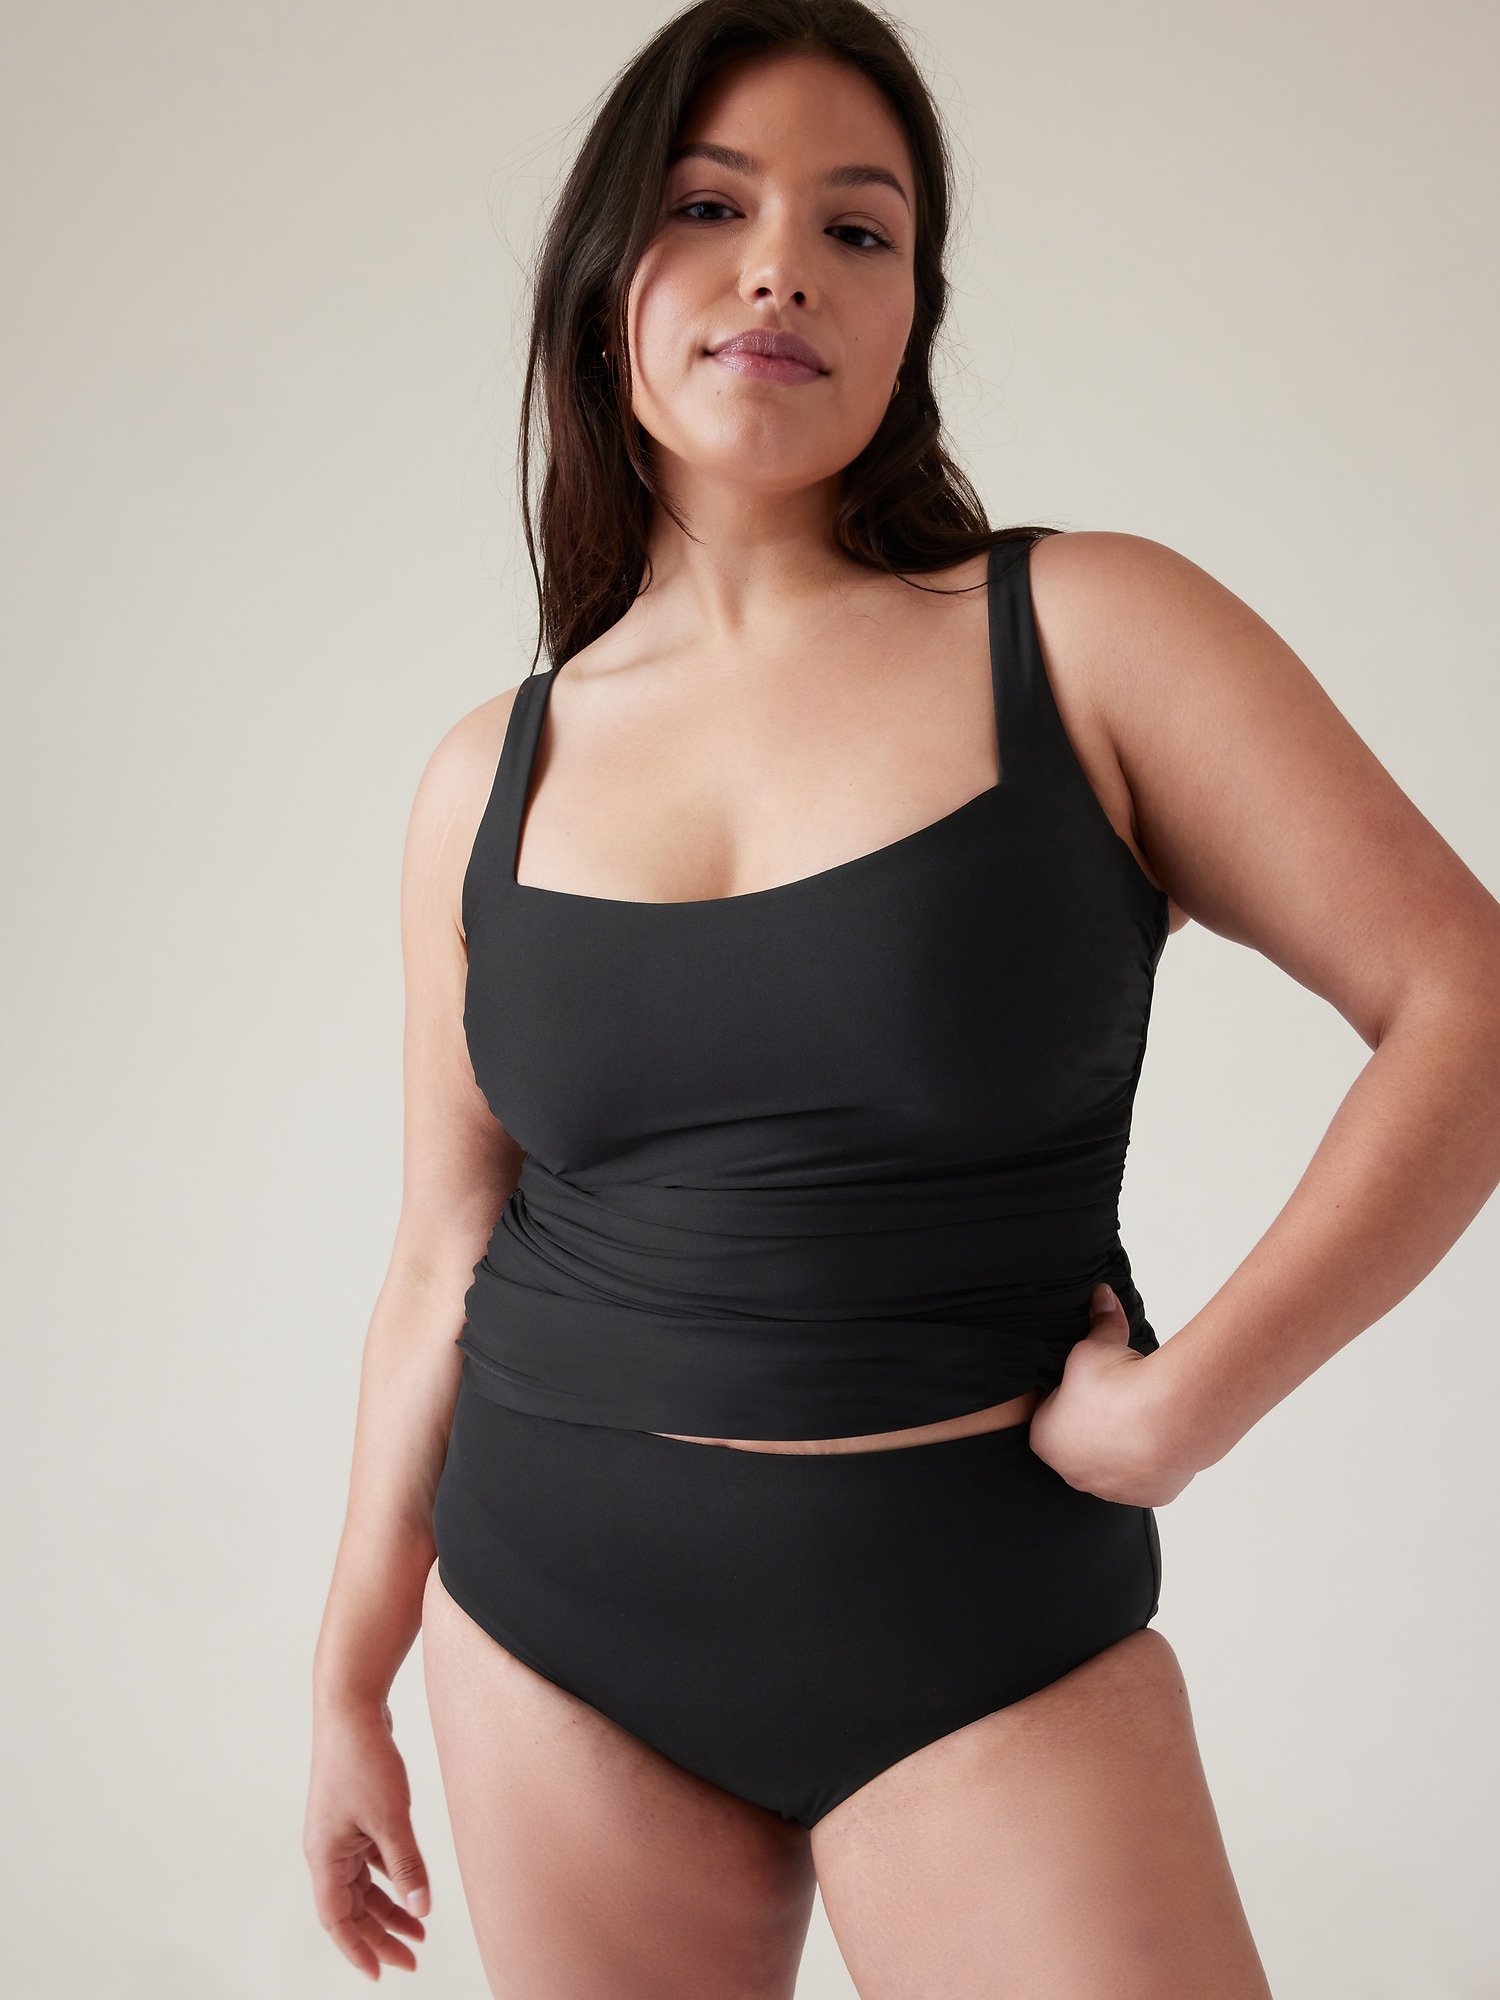 Swimsuit Tops & Tankinis With Built in Bra, Sizes XS-6X